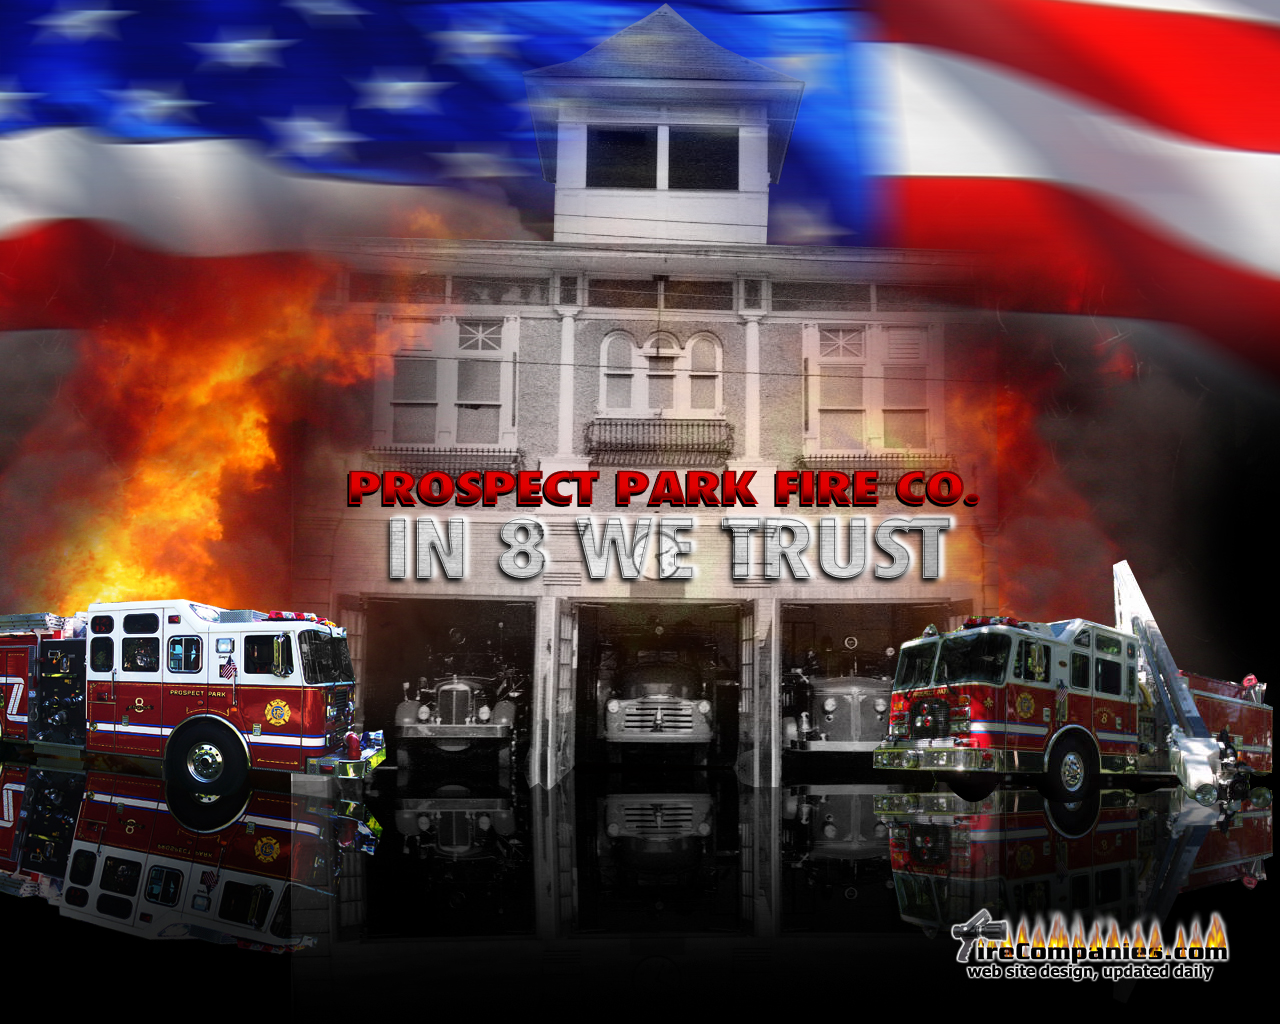 Welcome to Prospect Park Fire Co. :.